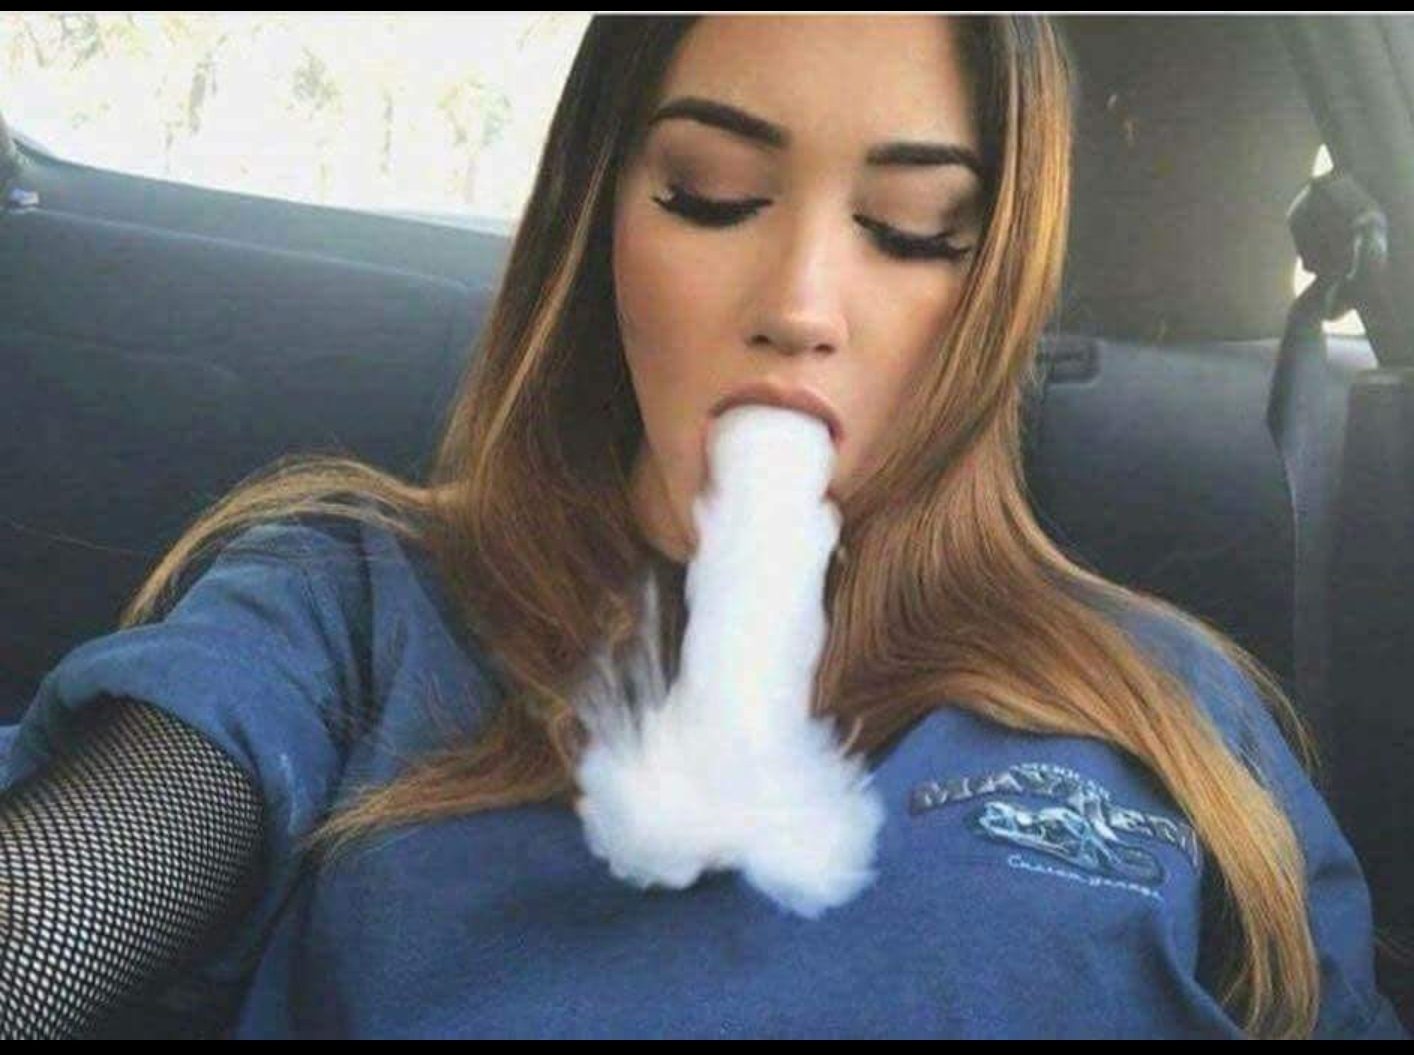 Vape tricks to a whole new level. : Vaping